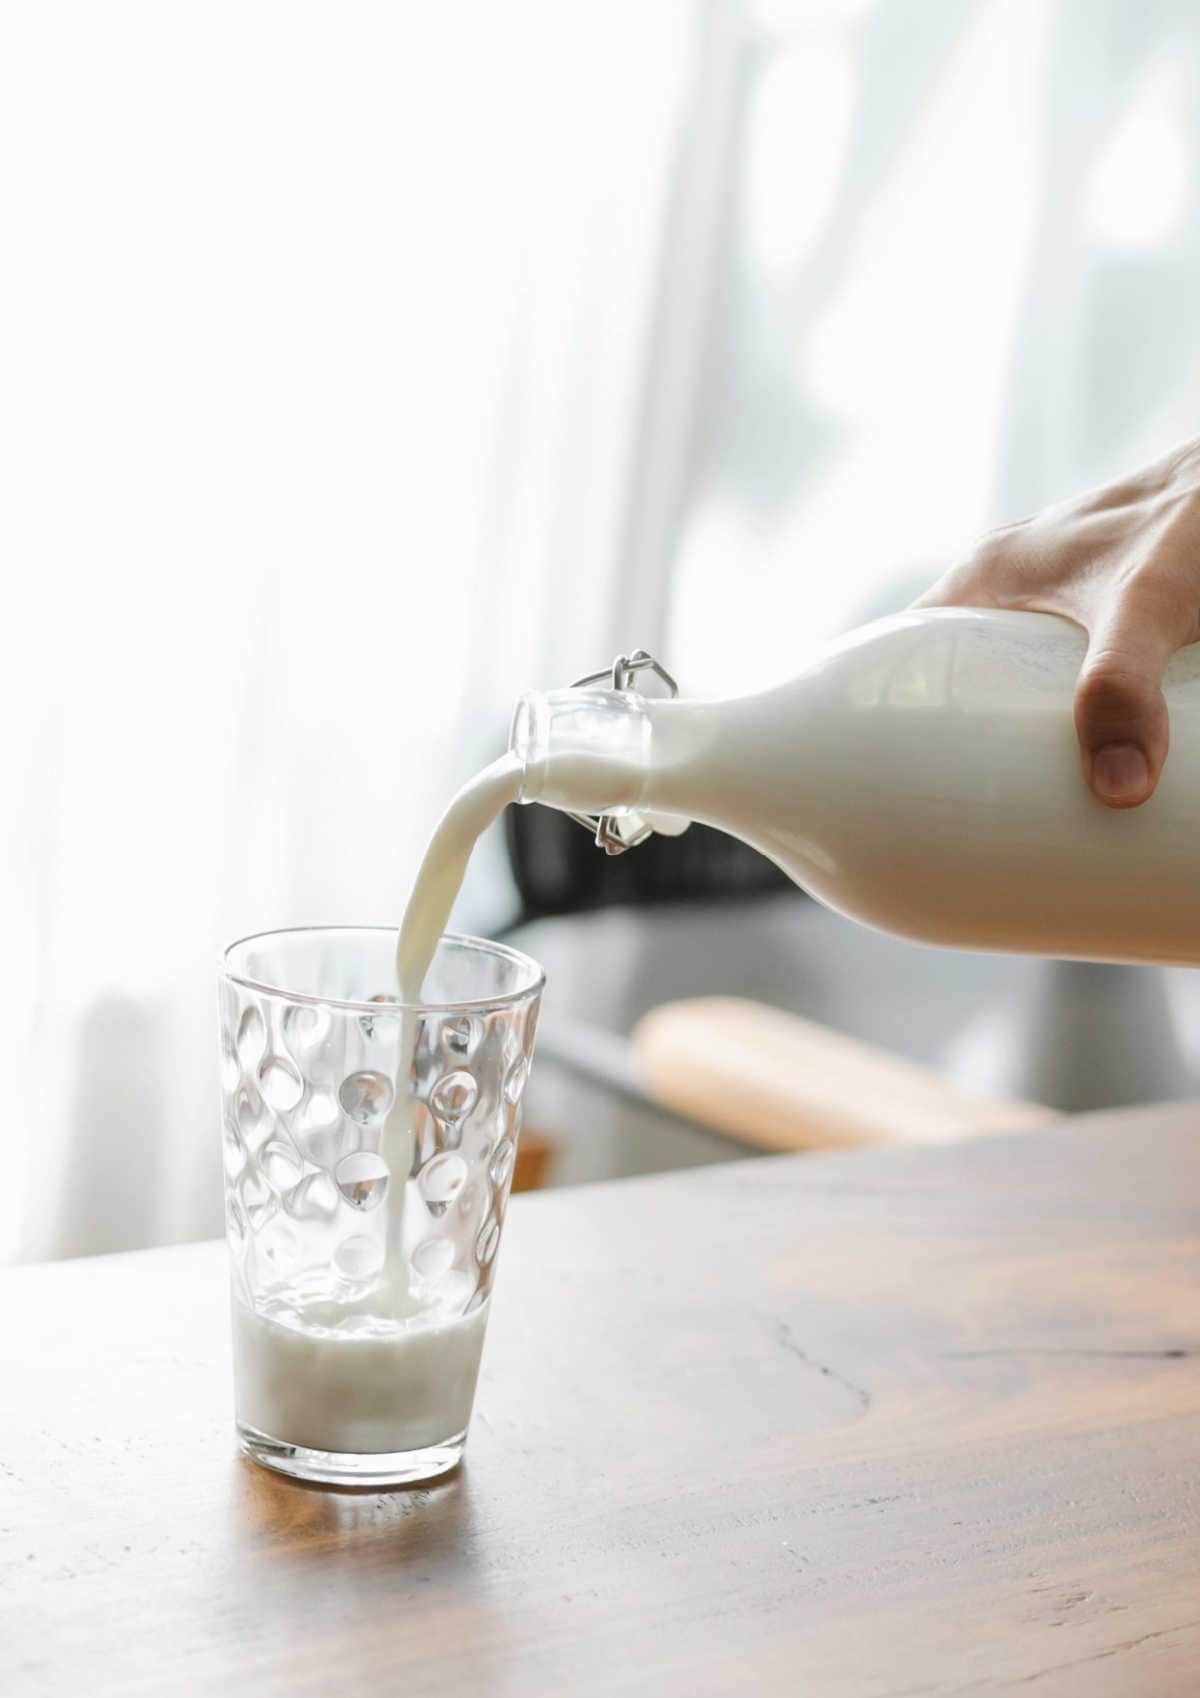 How To Tell If Milk Is Off – The Quickest & Best Method